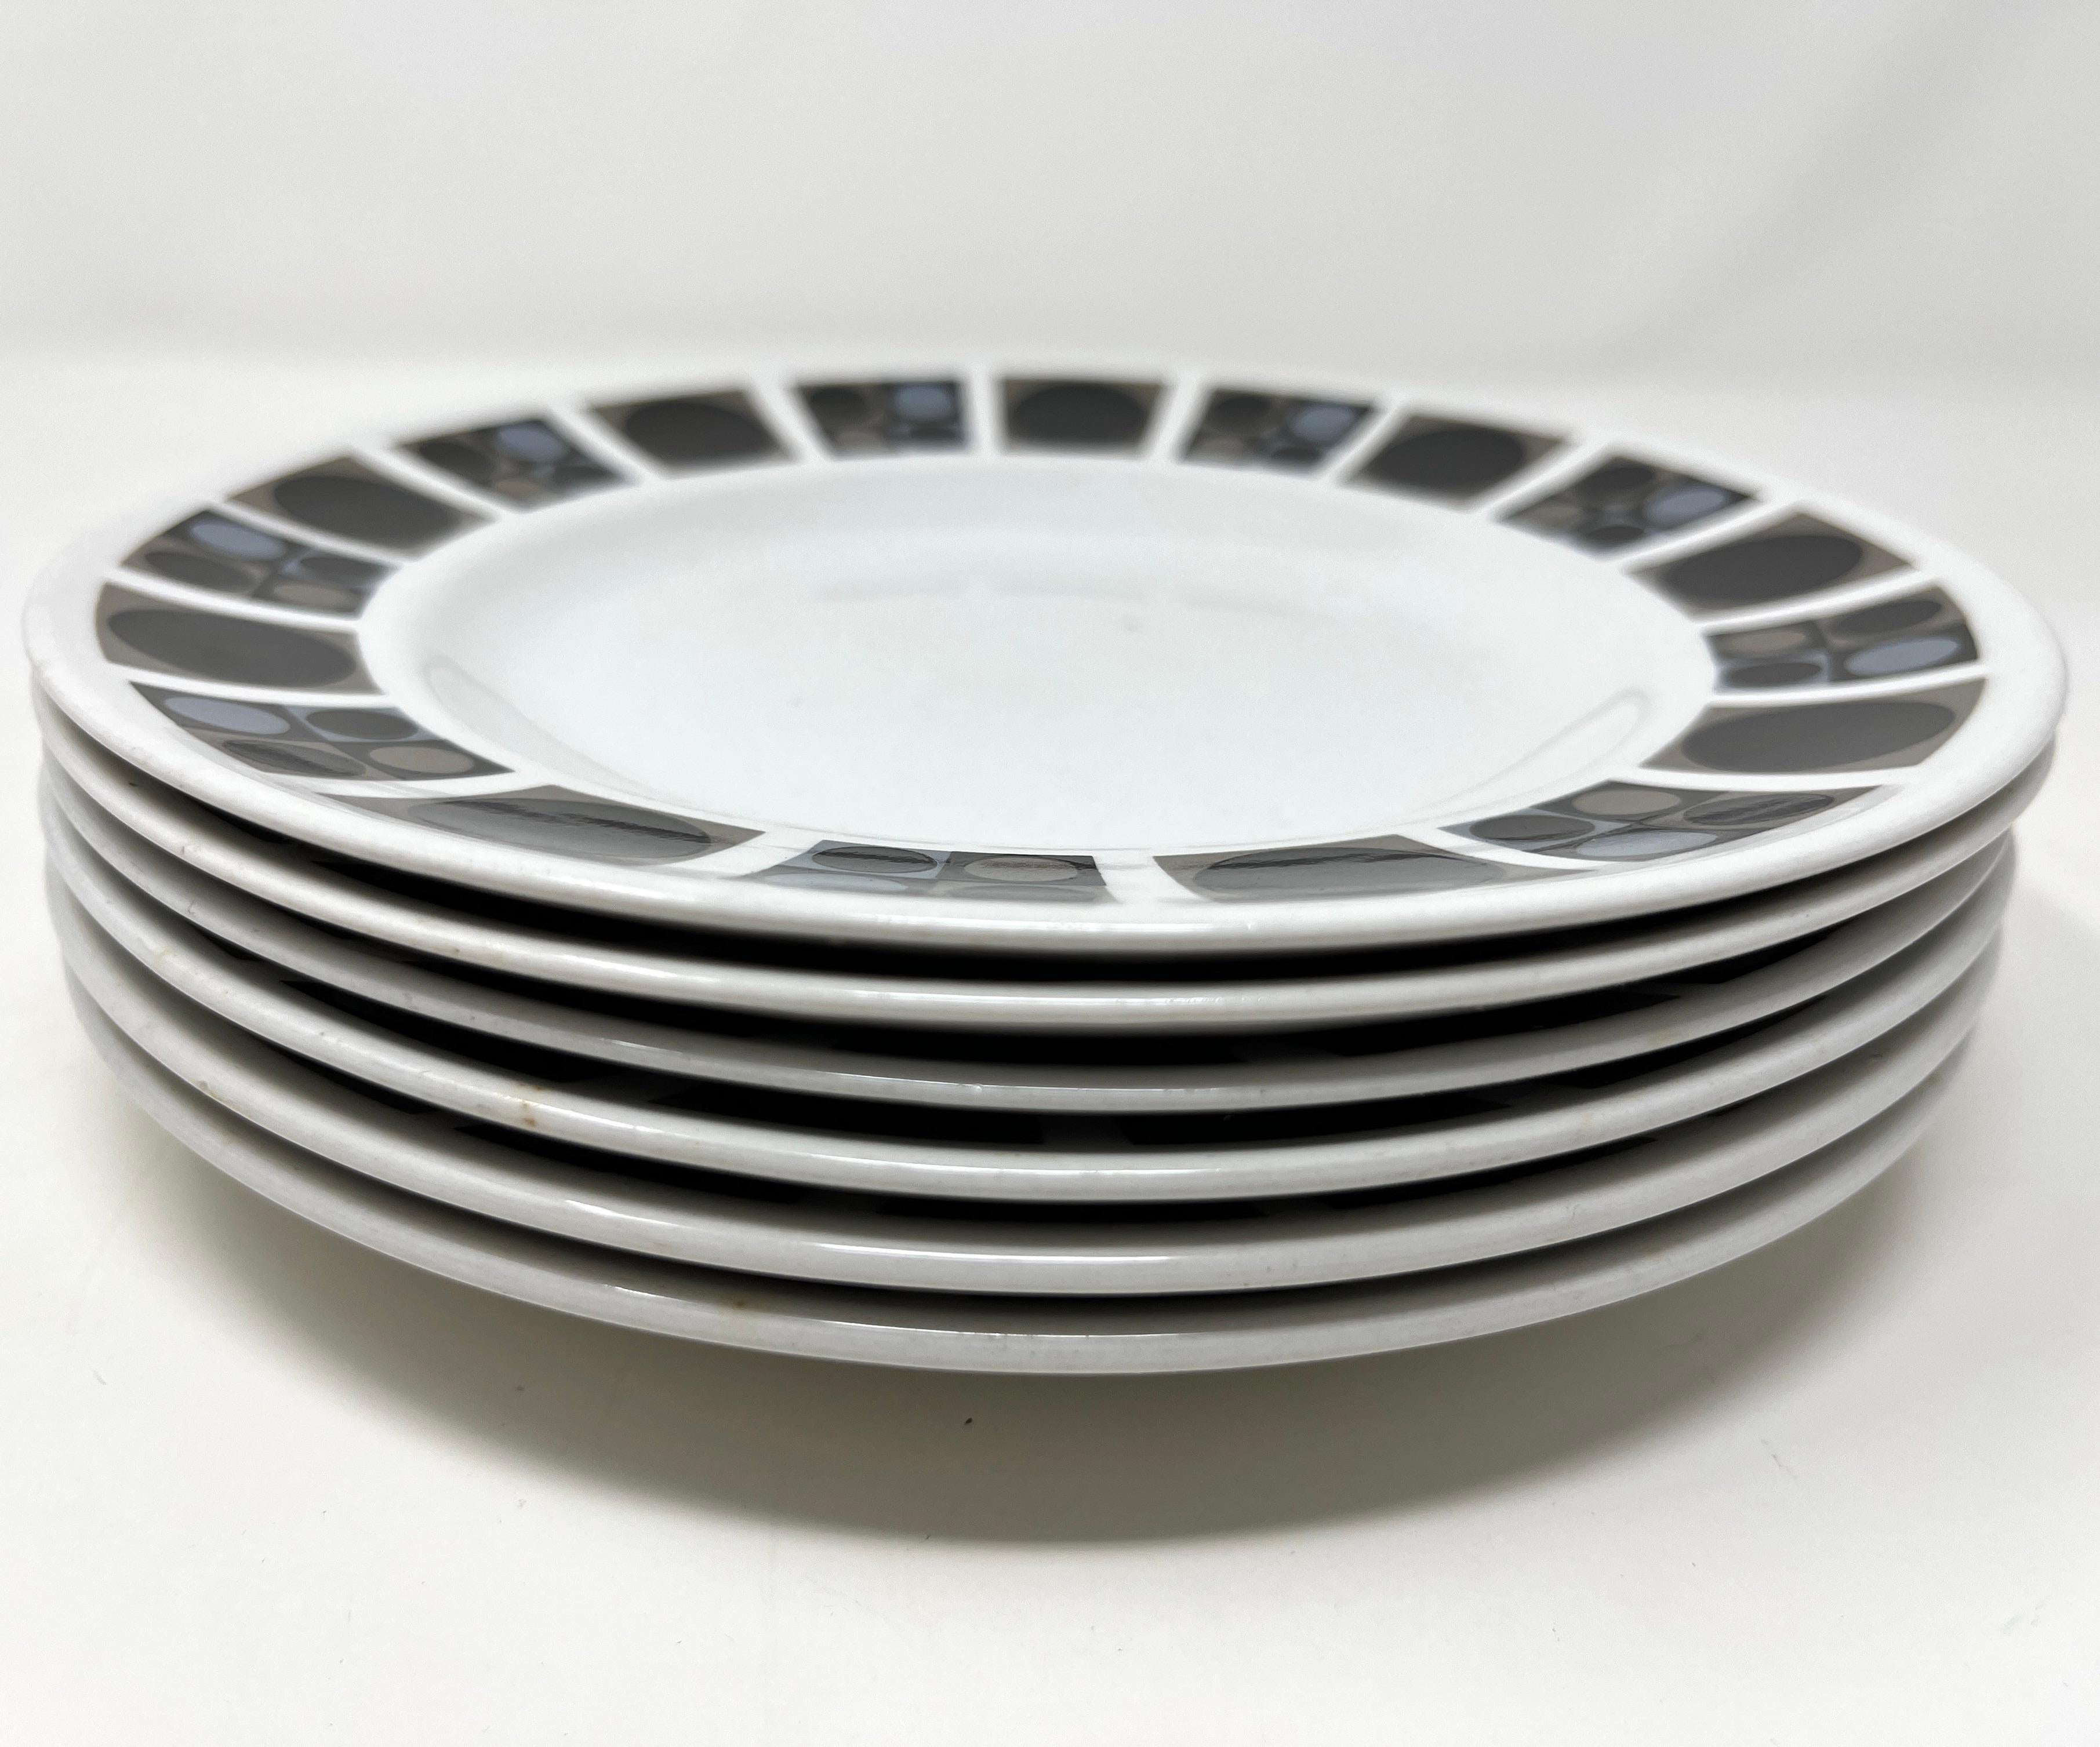 Set of 6 Ceramic English Earthenware Tea Plates in Focus Pattern by Midwinter In Good Condition For Sale In Chicago, IL